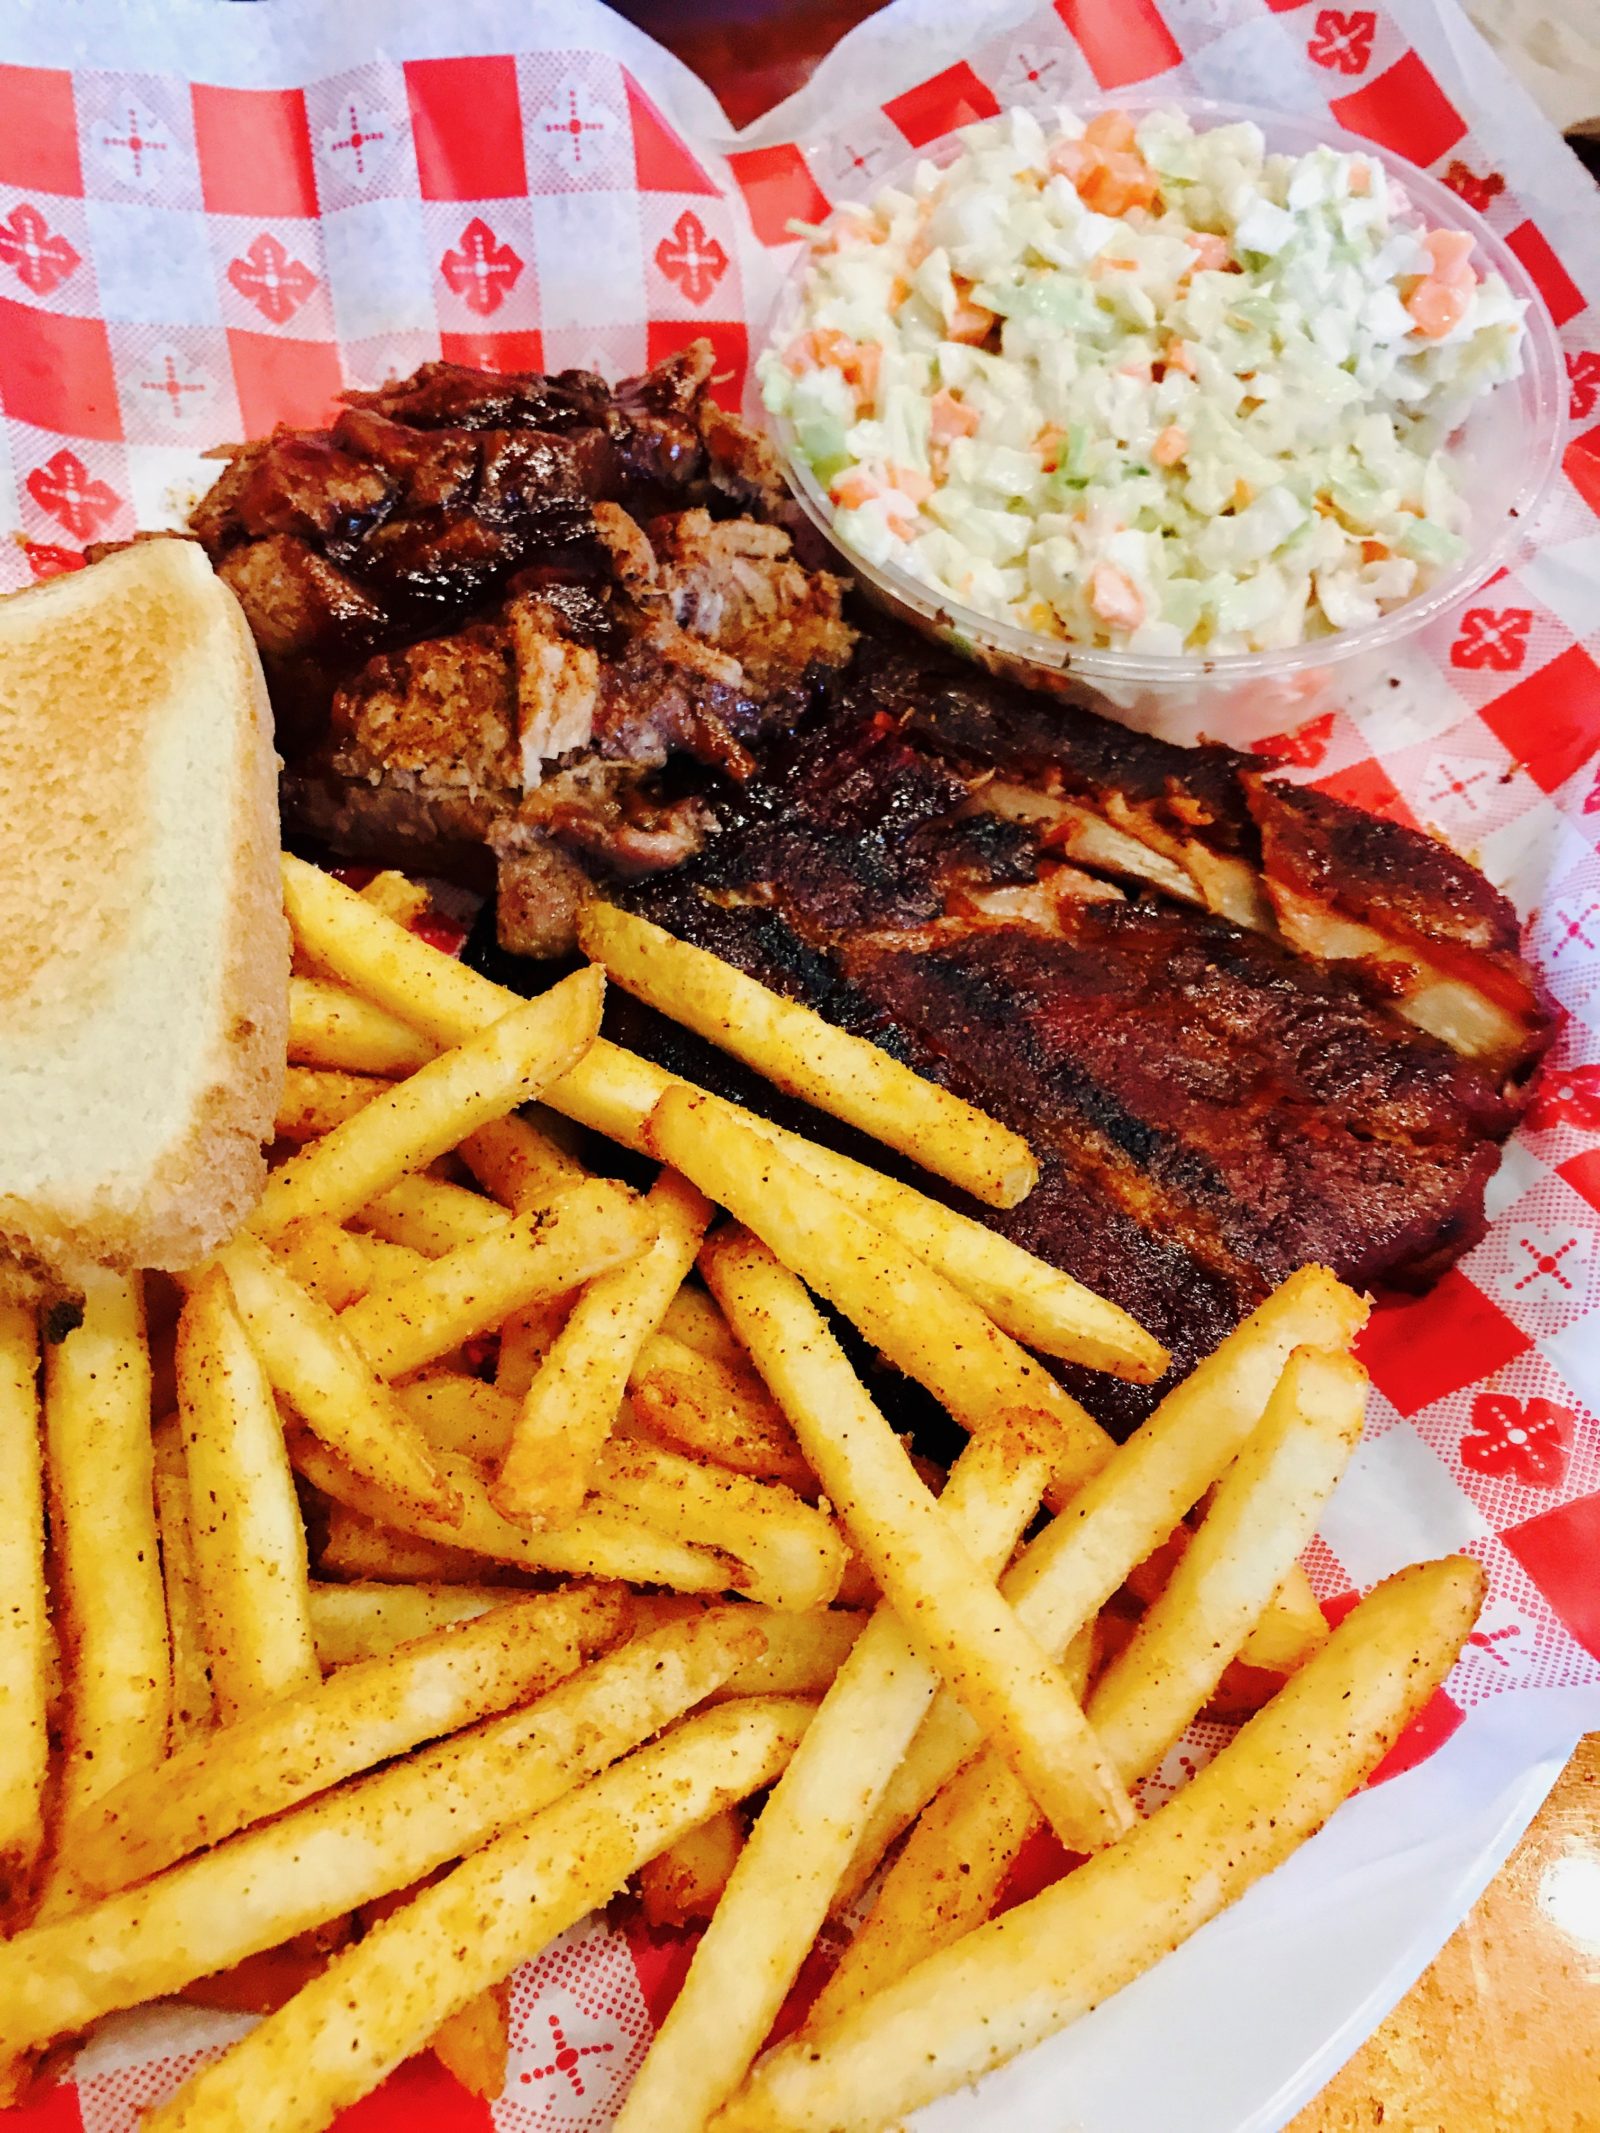 Pick of the Week - Q to U BBQ - Combo Plate with ribs and the brisket; Cole slaw and French fries